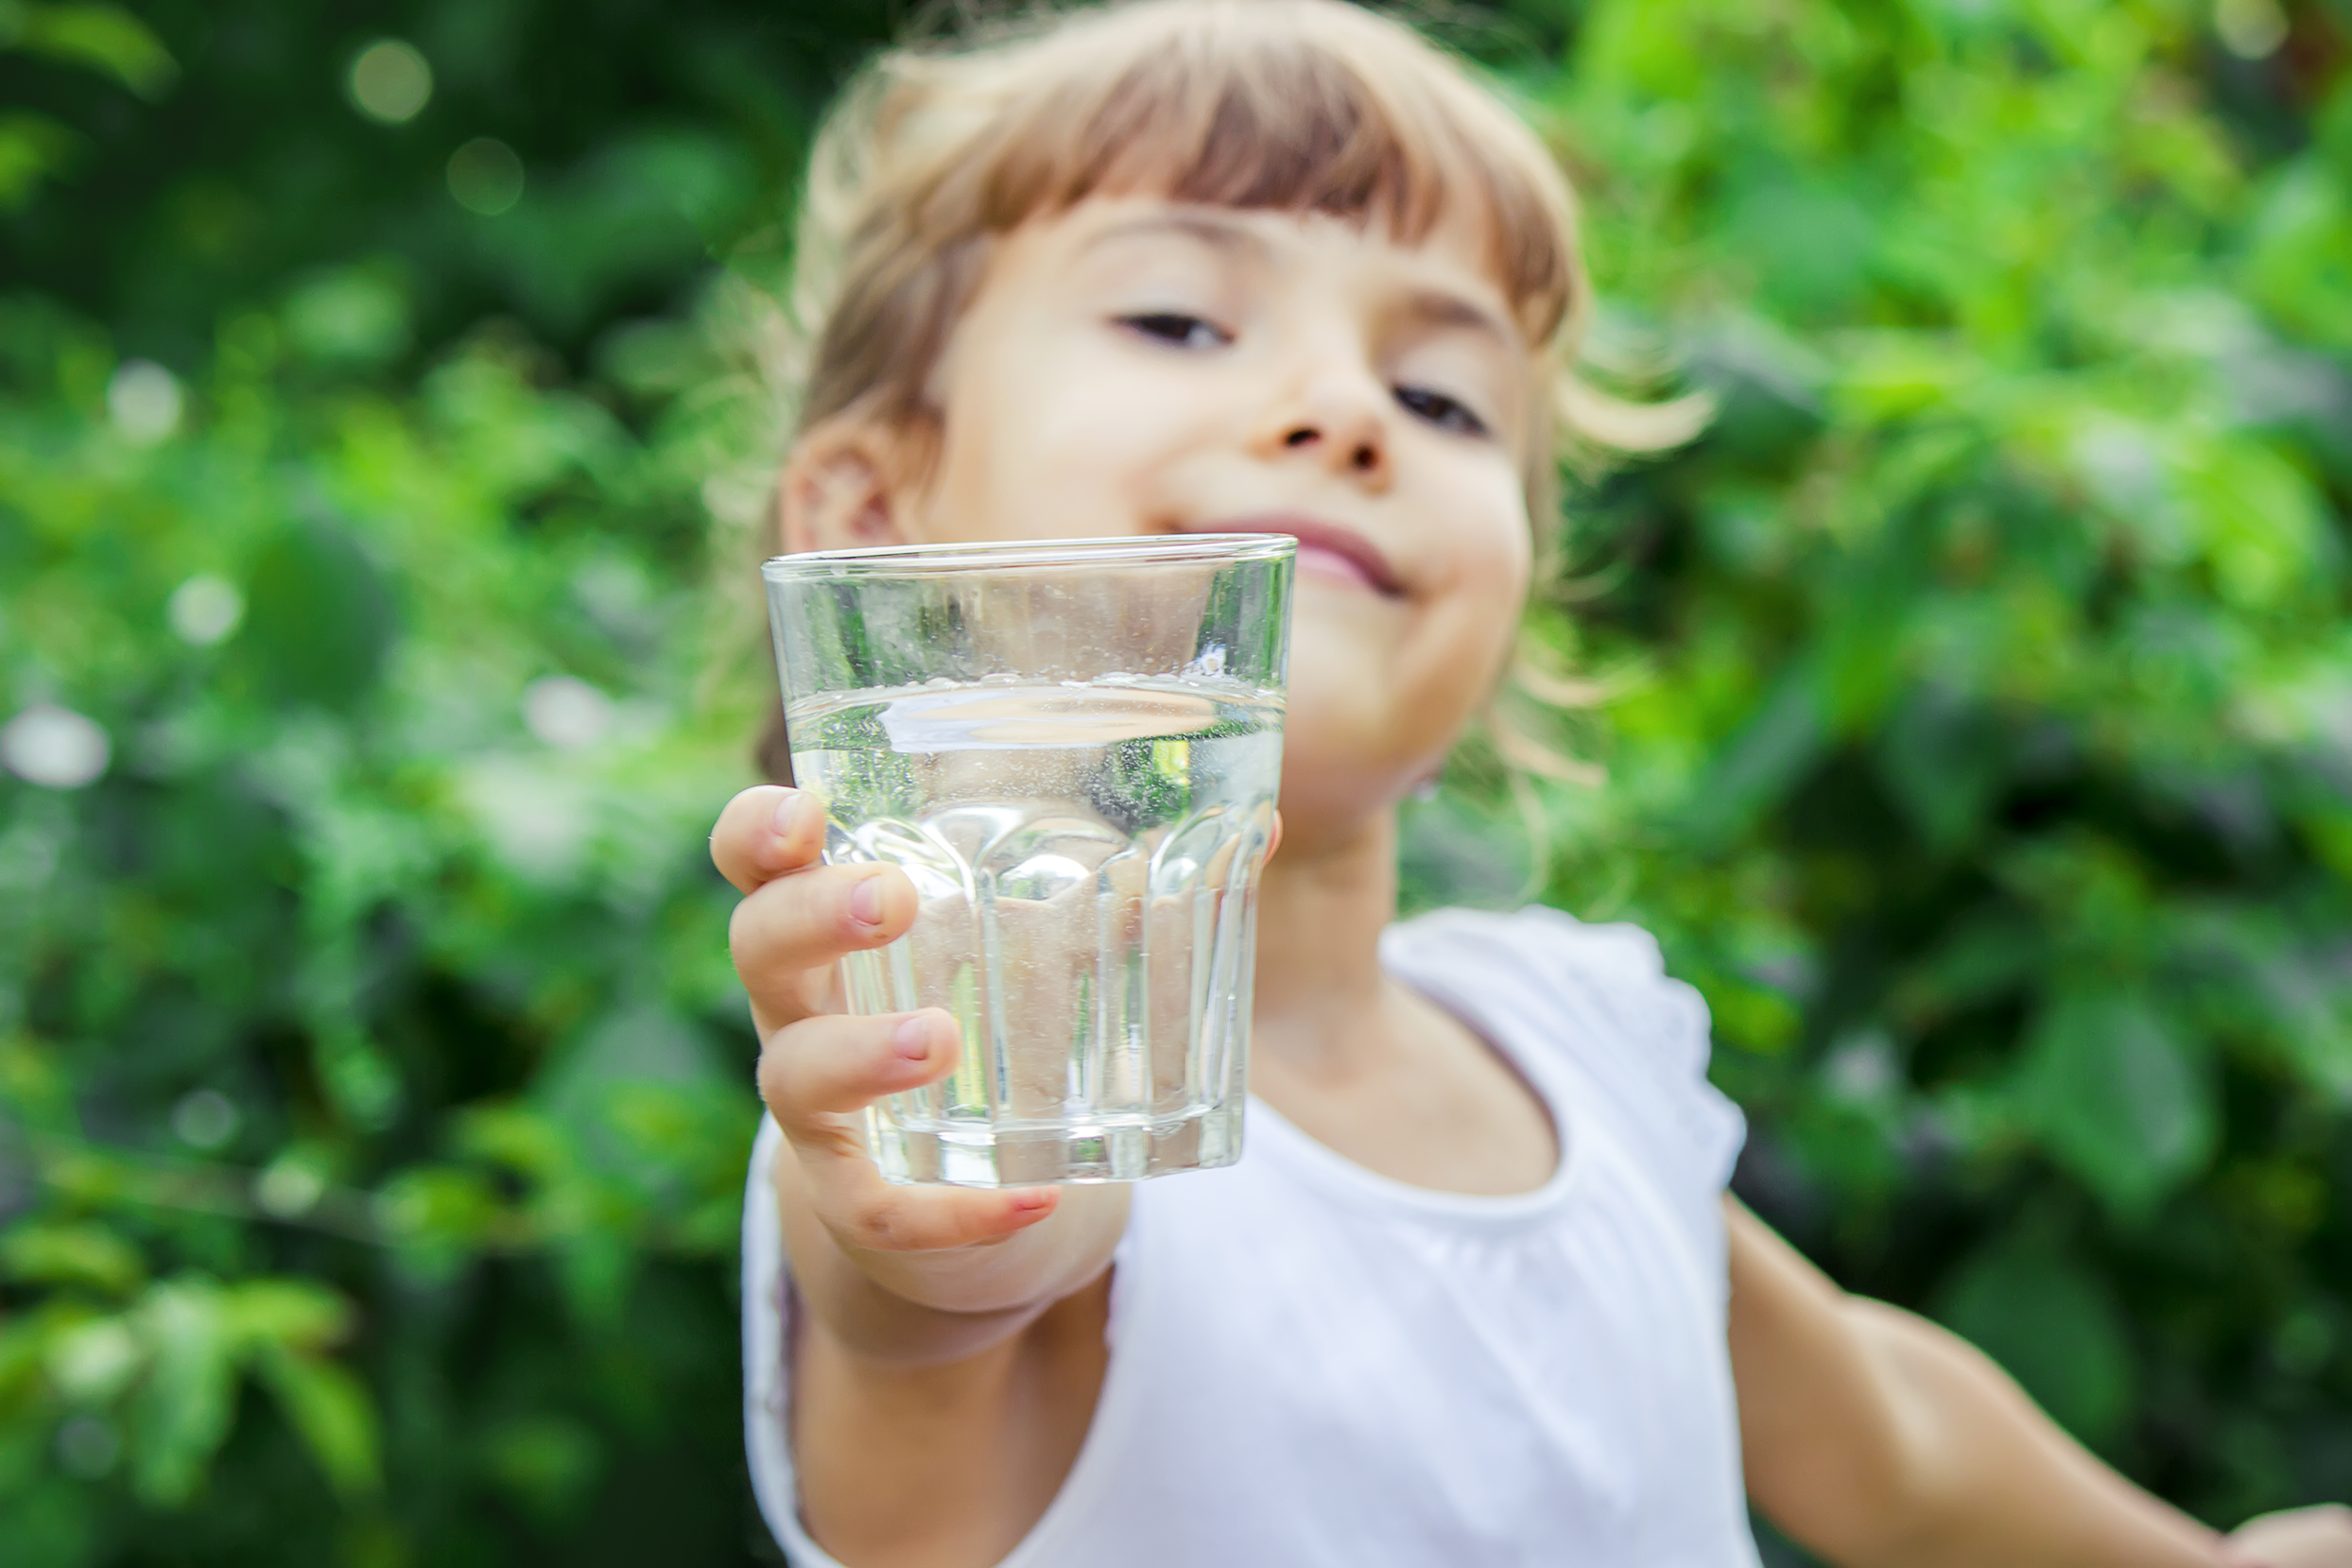 Queensland research has found fluoride in town’s drinking water is safe and doesn’t affect child development